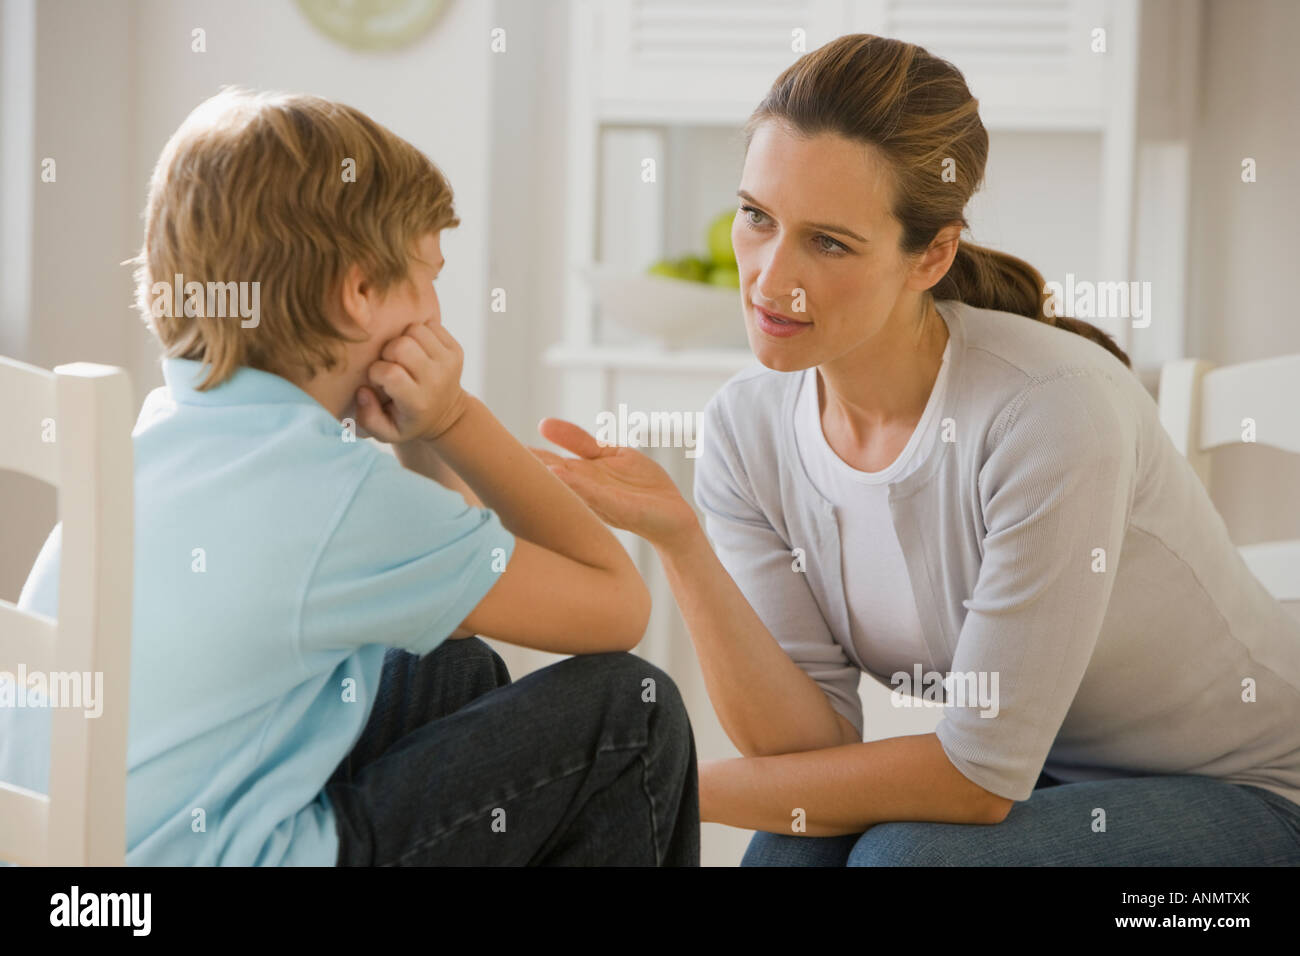 Mother having discussion with son Stock Photo